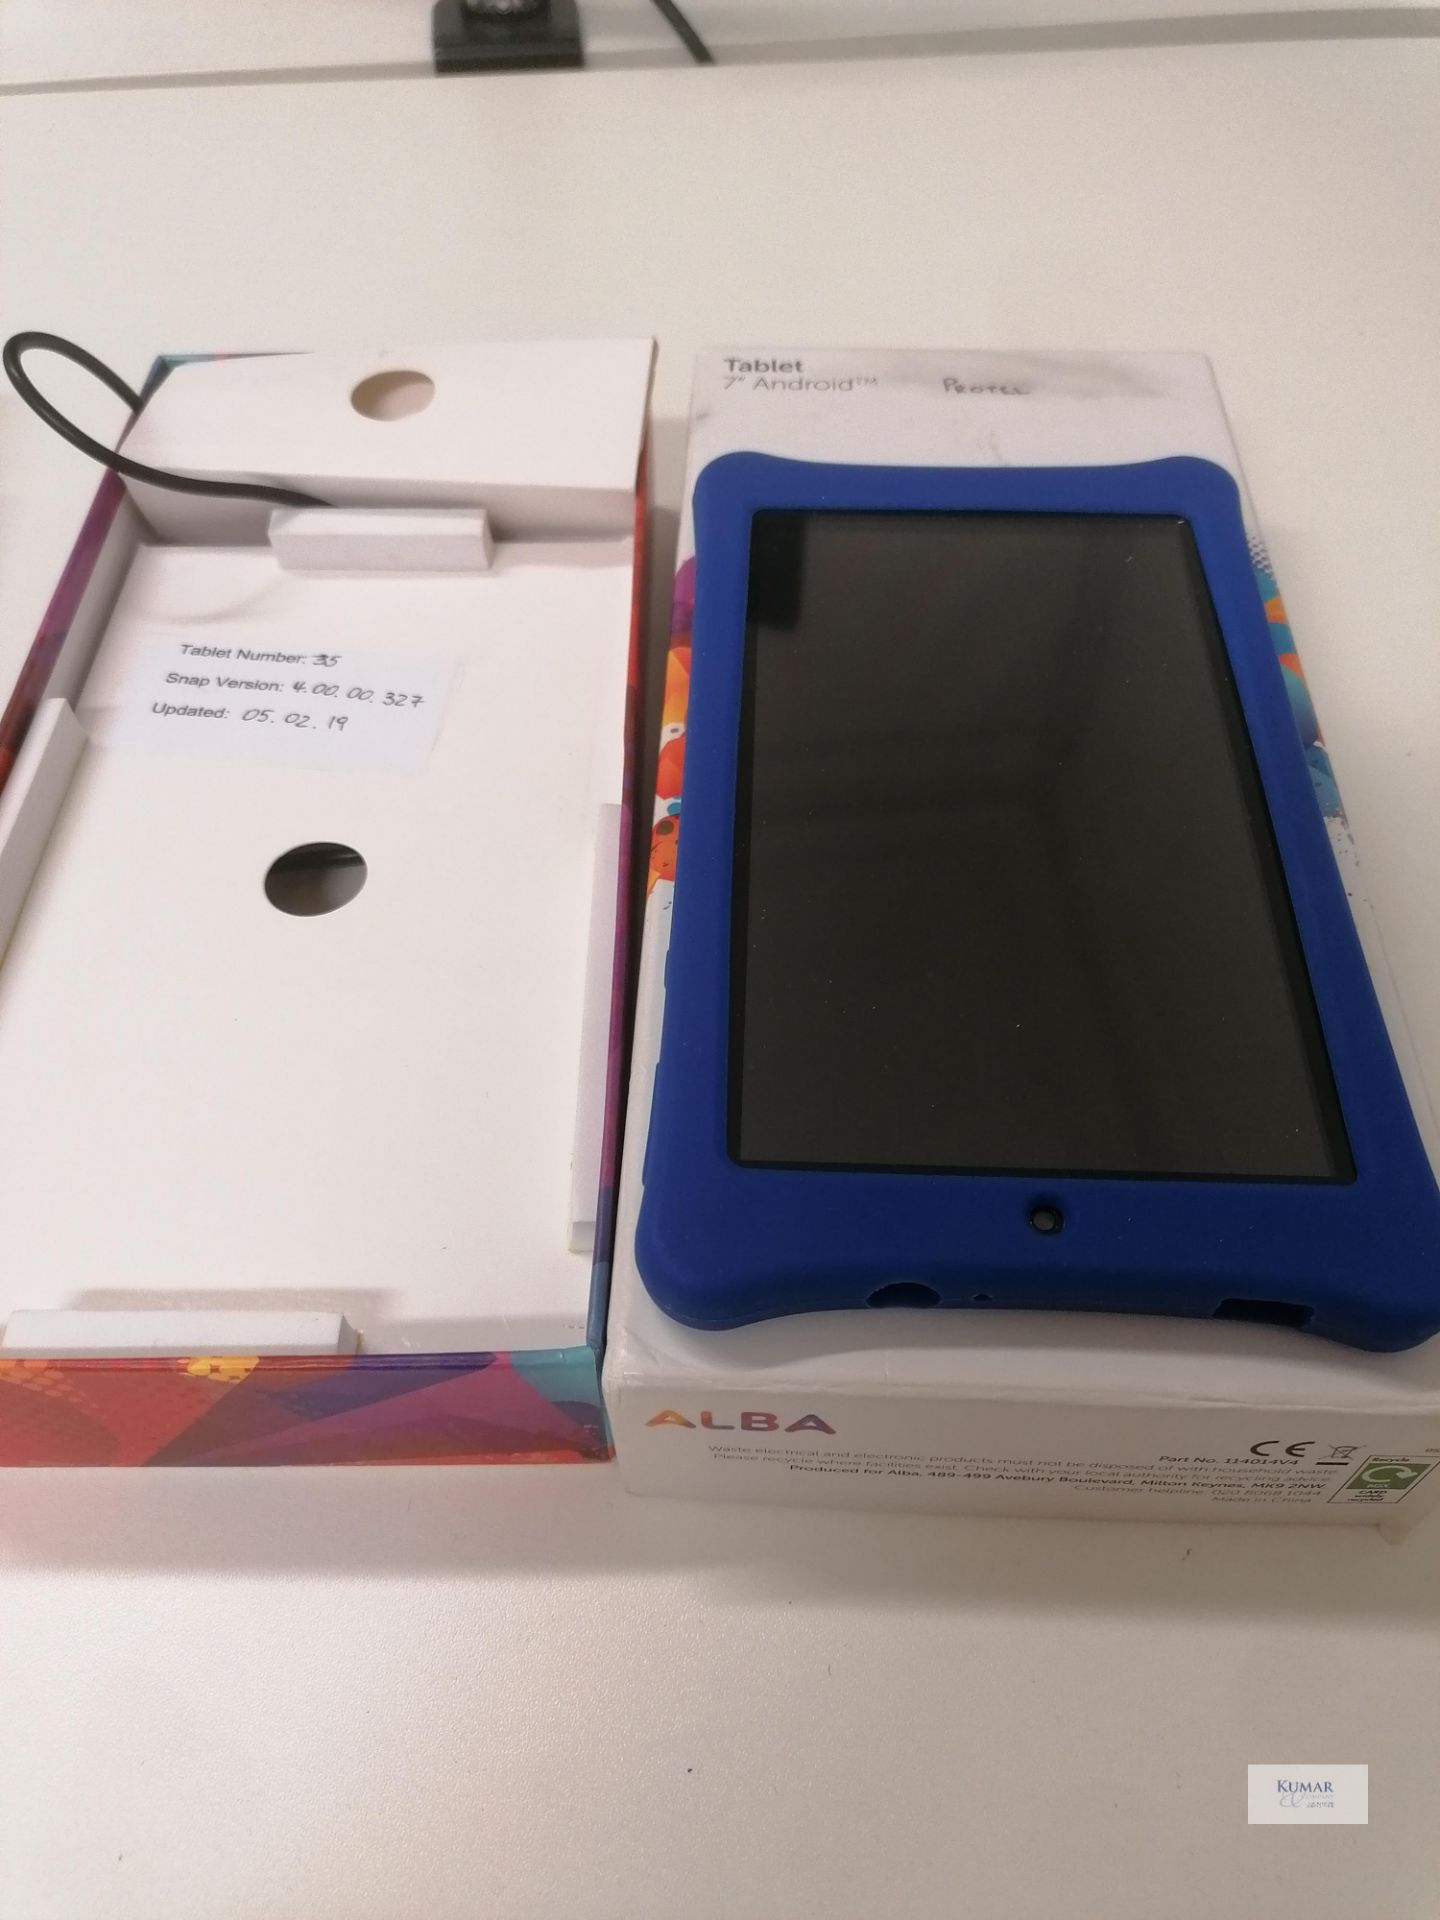 Alba Model AC07PLVS 7" Tablet with protective case,cable and charger Boxed - Image 3 of 6